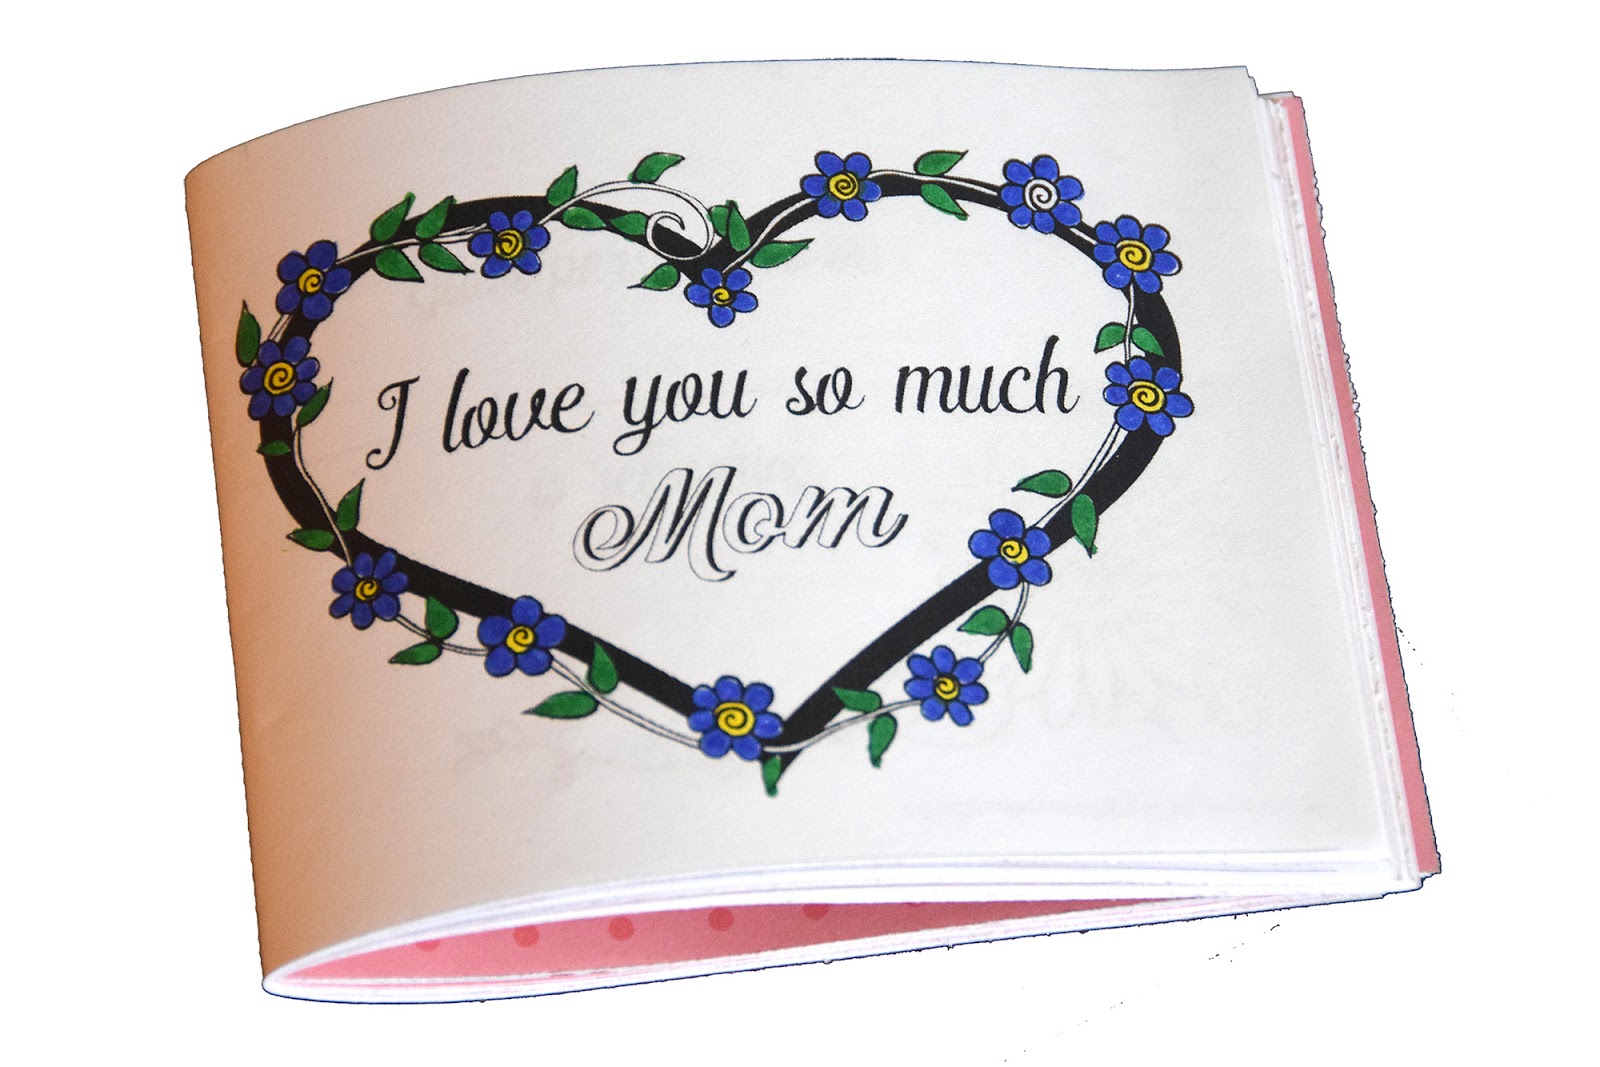 What I Love About Mom: Prompted Fill In The Blank Book Journal |  Sentimental Gift For Mom | Easily Write The Reasons Why You Love Your Mom